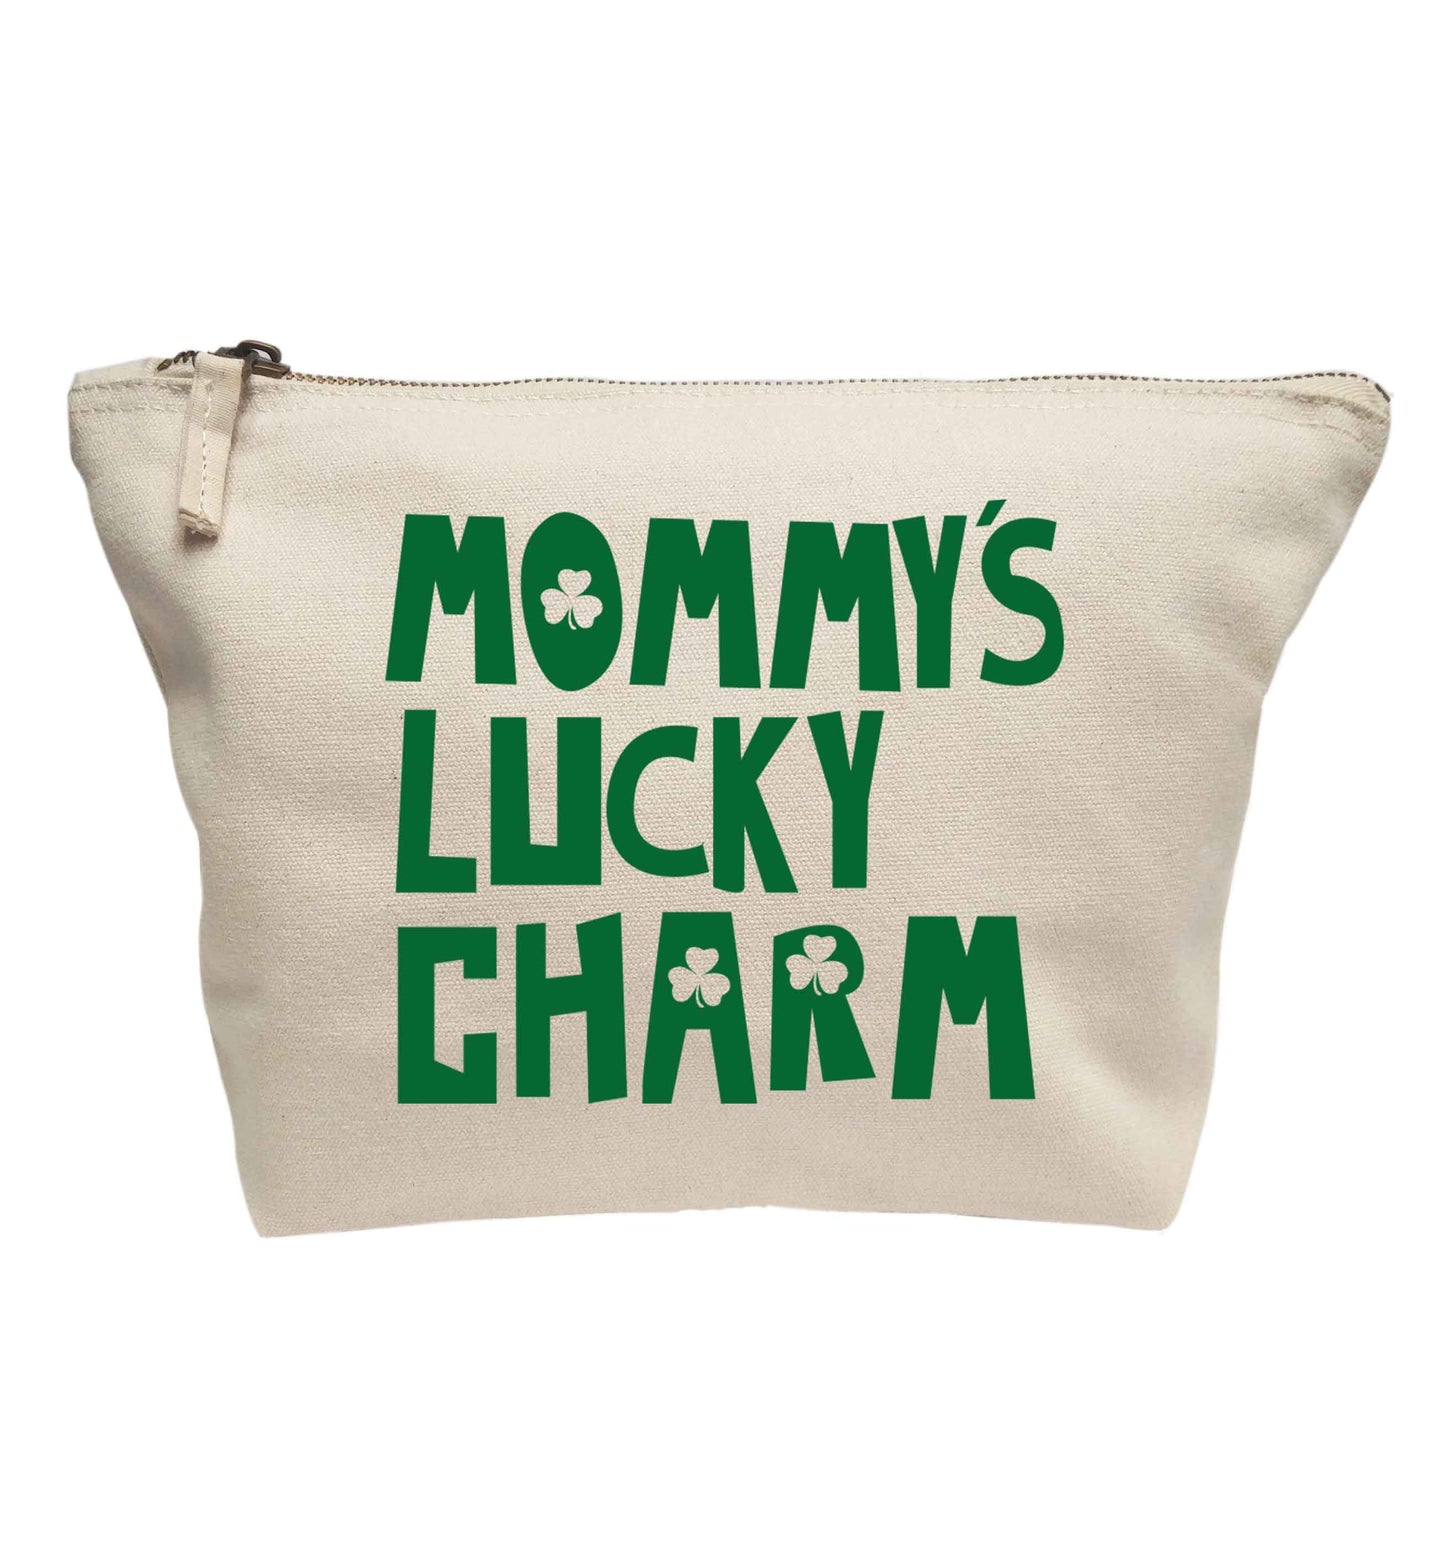 Mommy's lucky charm | Makeup / wash bag